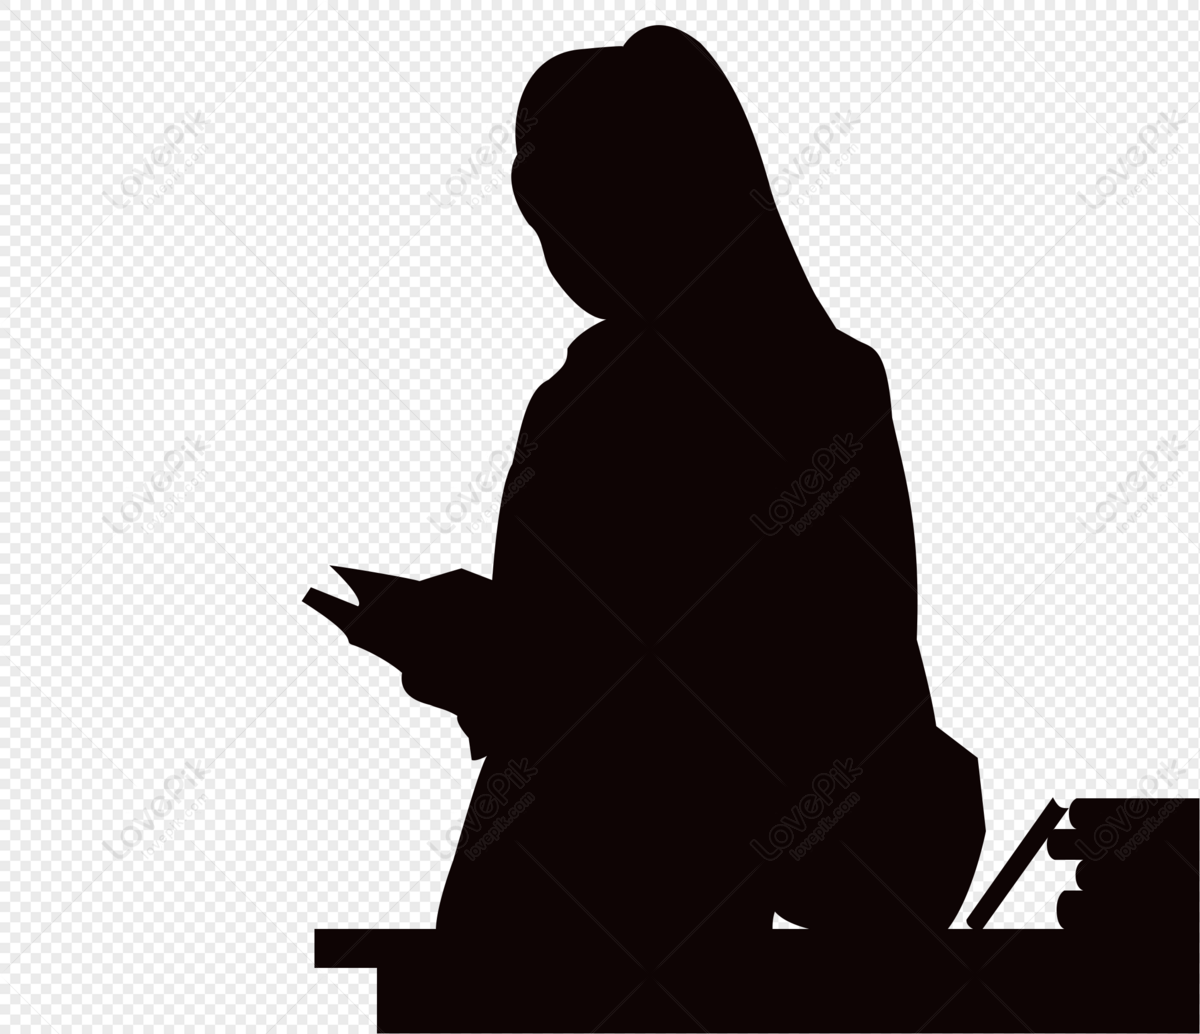 Girl silhouette in review, people sitting silhouette, girl, college entrance examination png transparent image